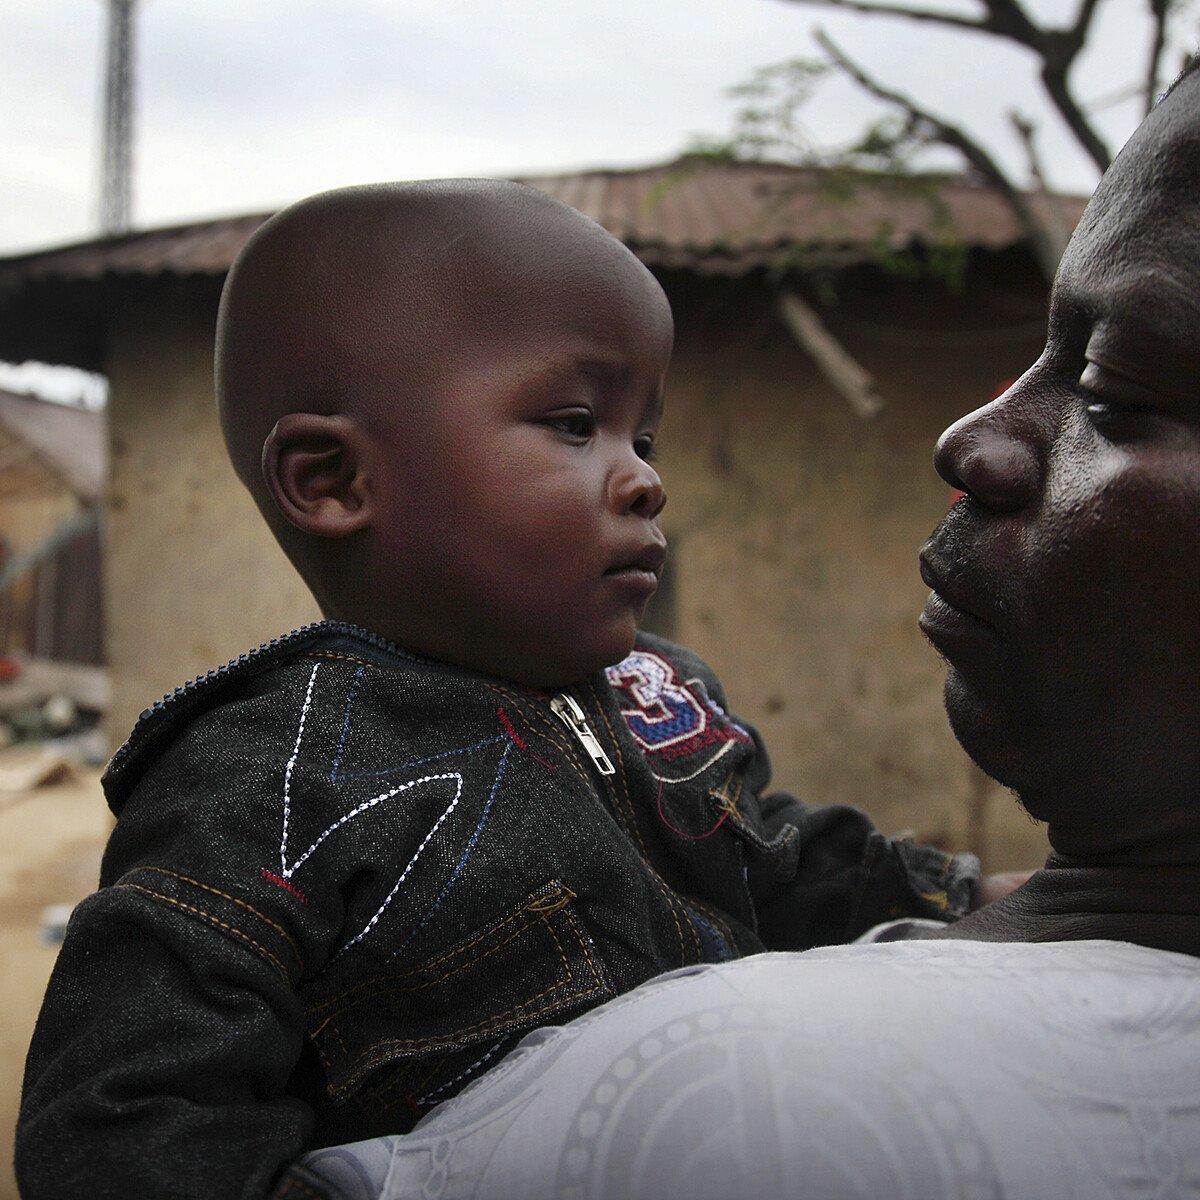 Father holding his toddler son in Bauchi, one of the regions in Nigeria affected by Lassa fever